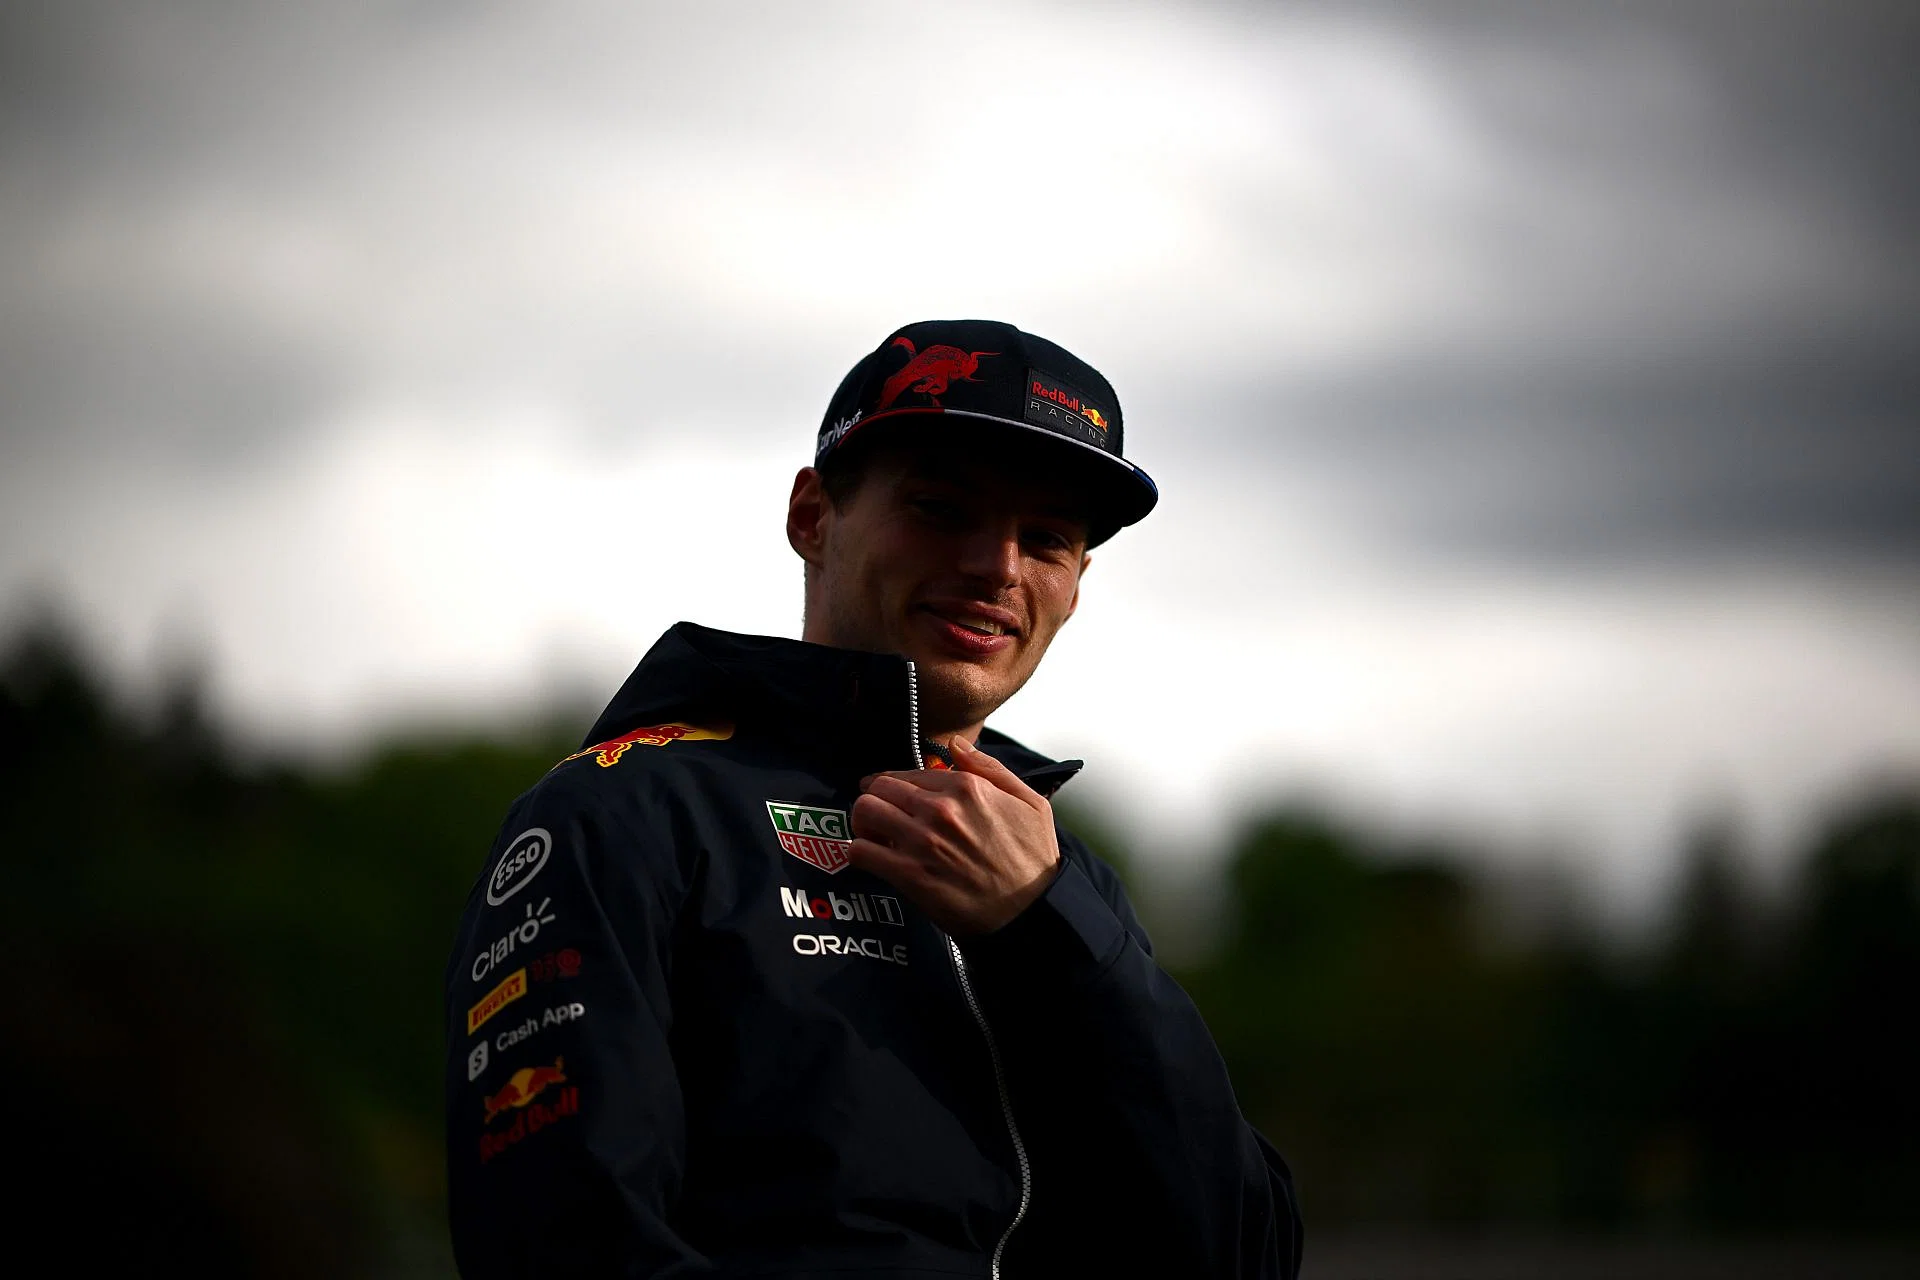 Spa Qualifying – Verstappen on pole, but will face penalties